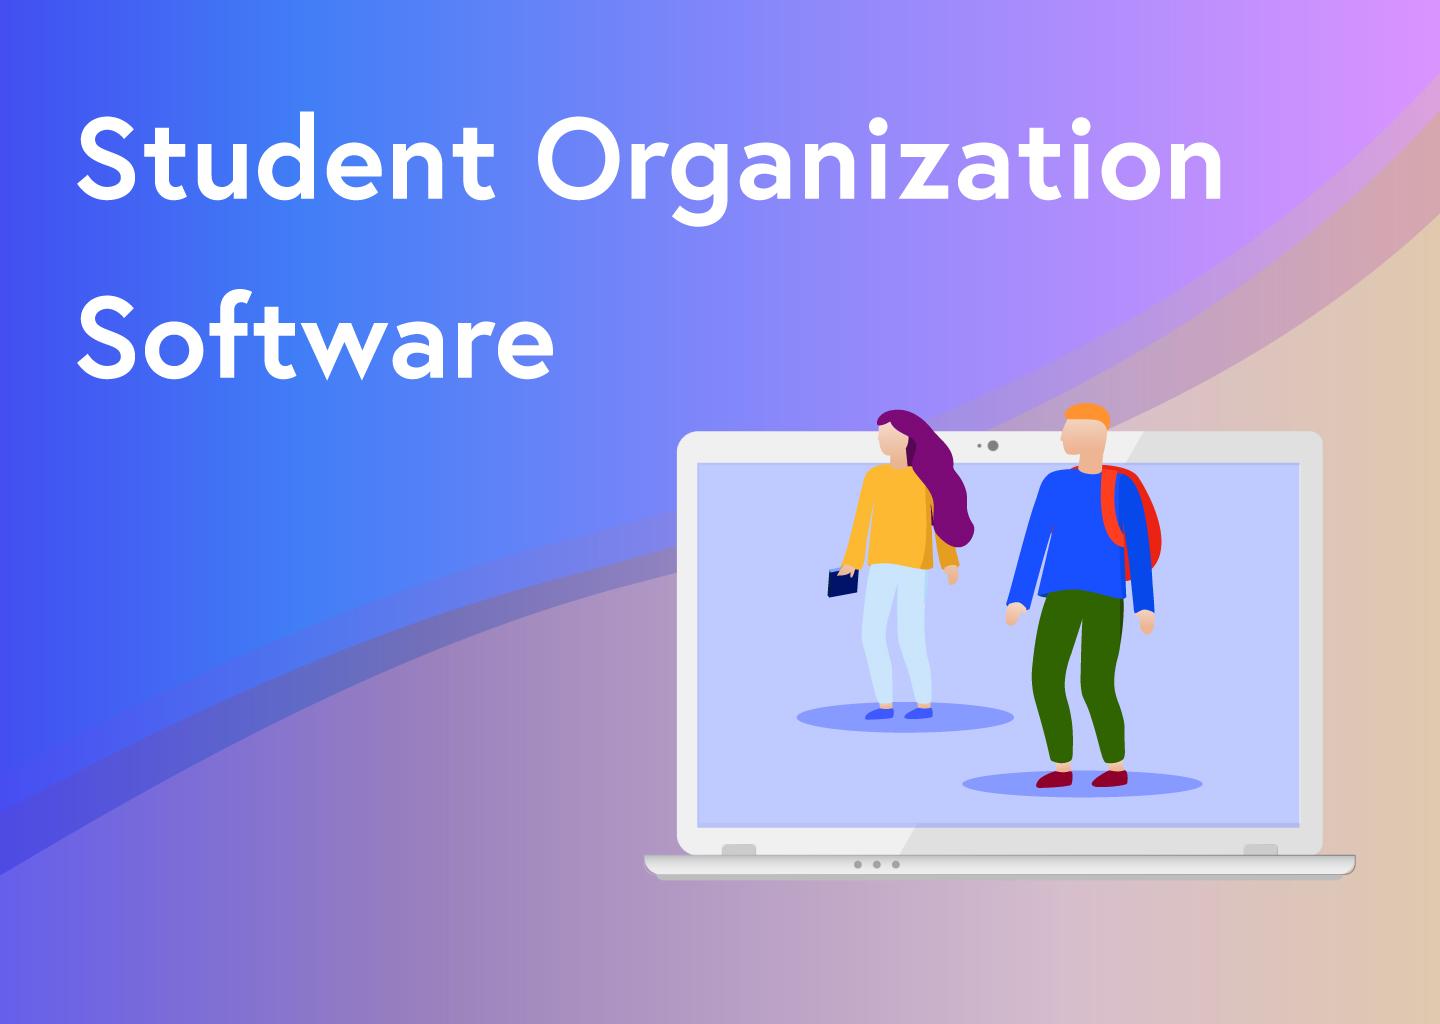 The #1 Student Organization Software Used By 100+ Student Organizations